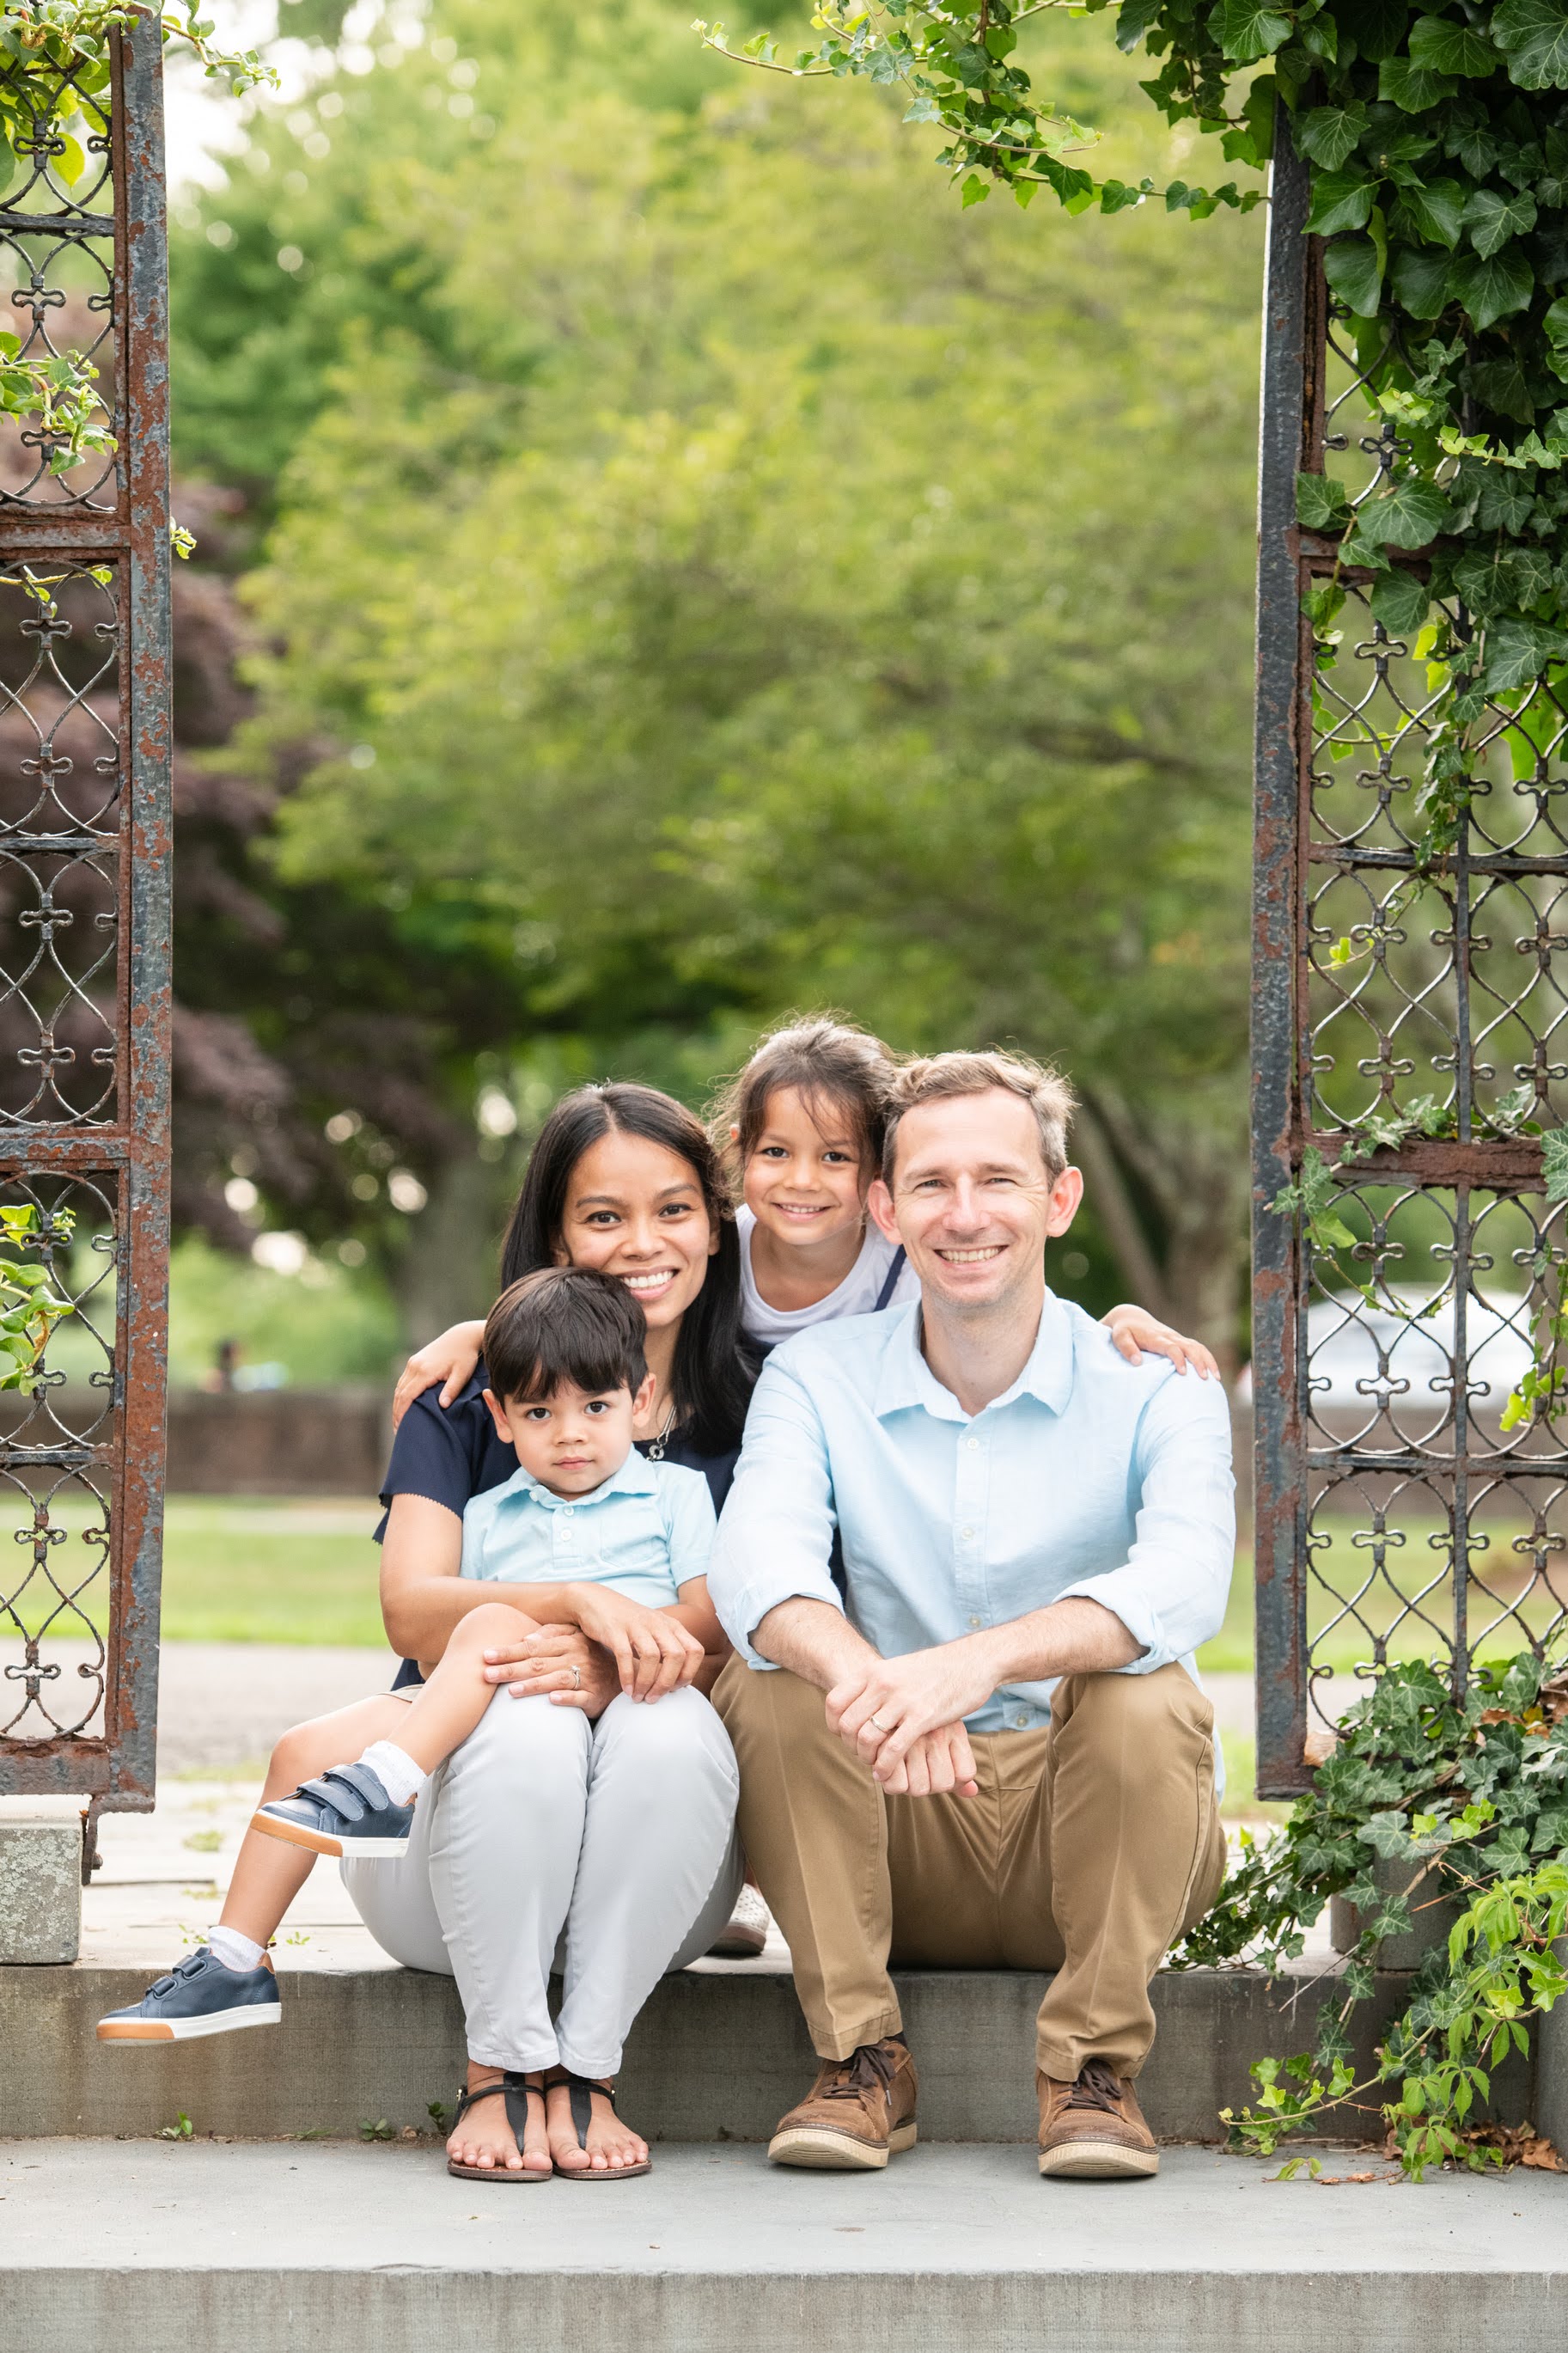 Fairfield County Family Photo Shoot | Photo by Erica Carryl of Vine & Branch Photography